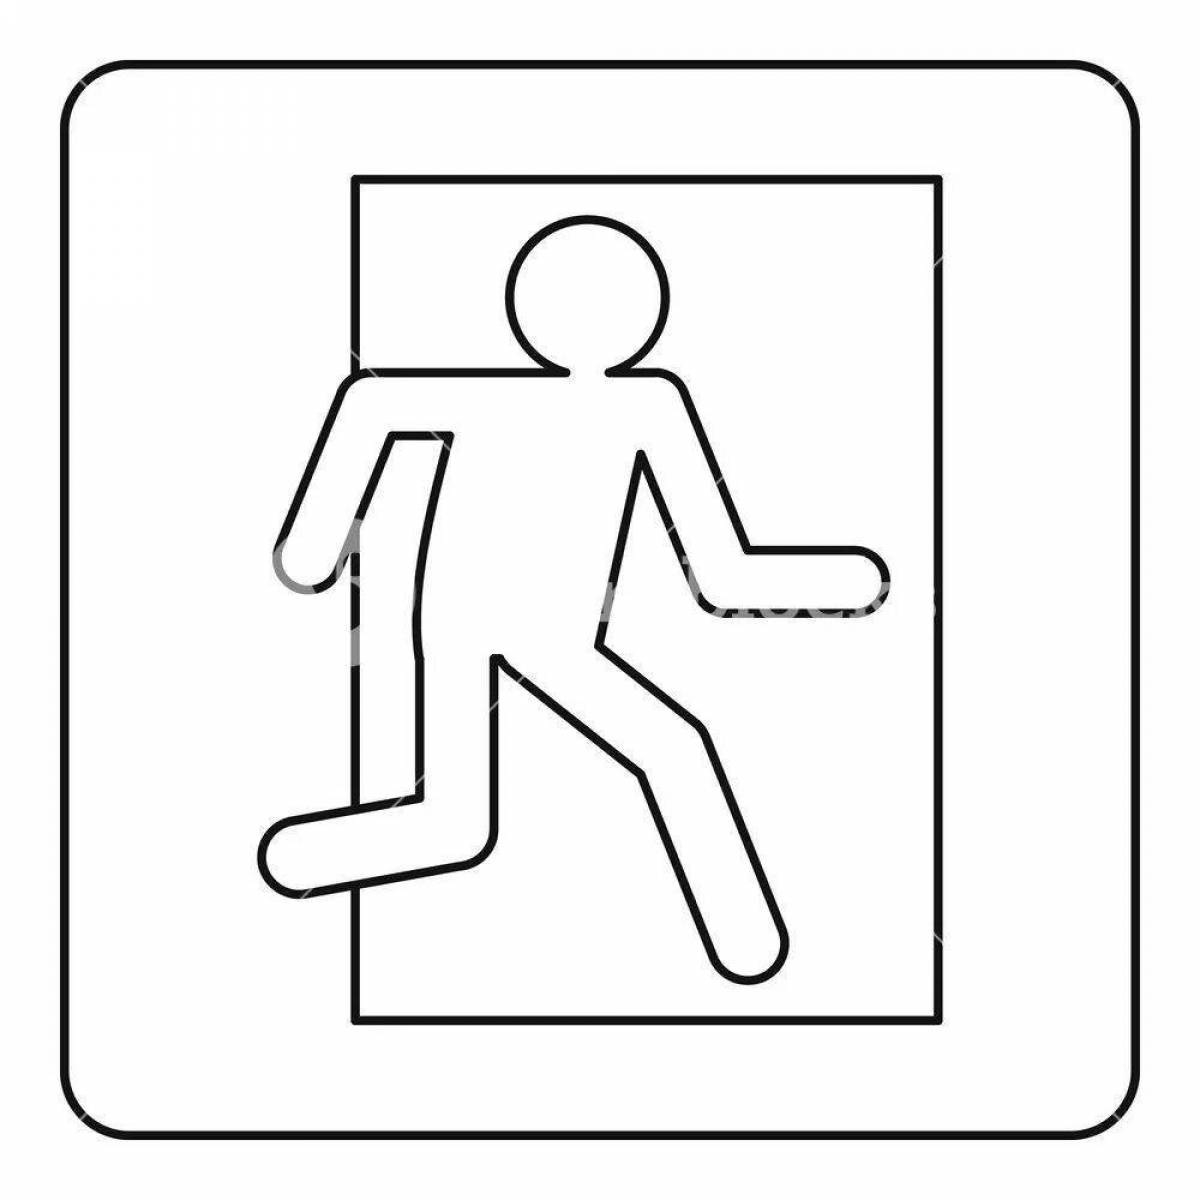 Coloring page shining safety sign